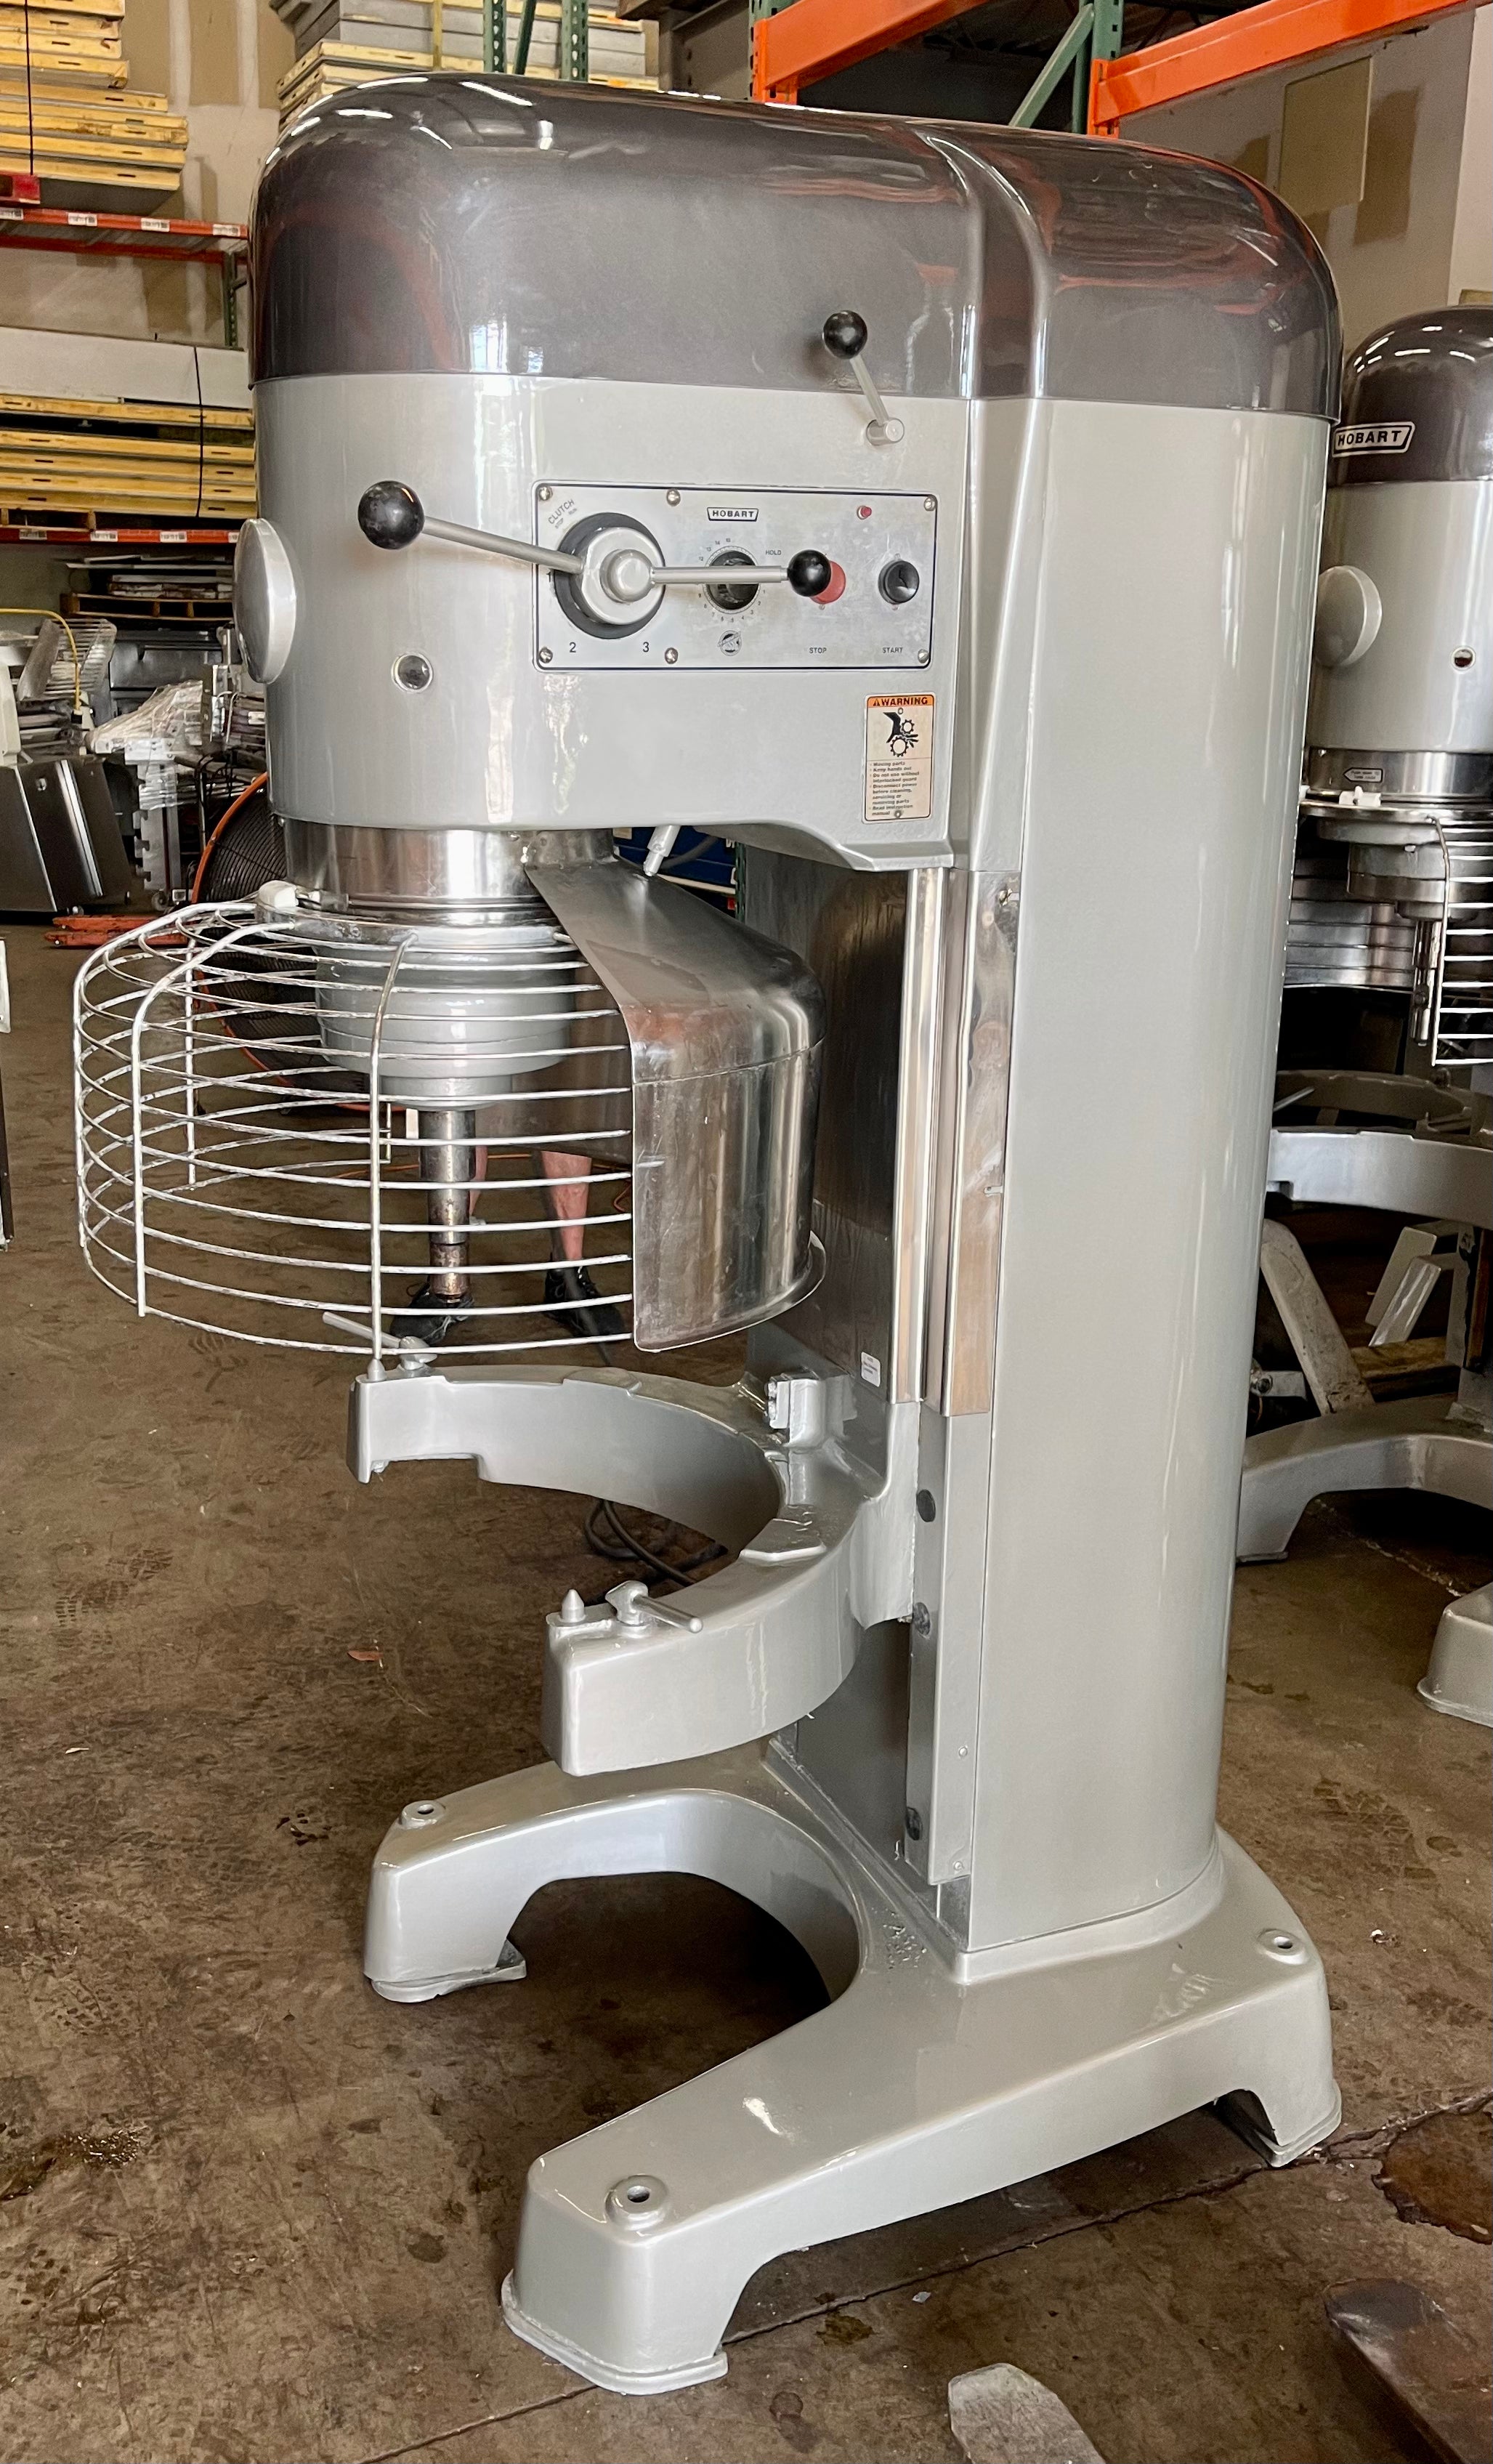 Hobart V1401 140 quart mixer. Comes with stainless steel bowl and 1 attachment